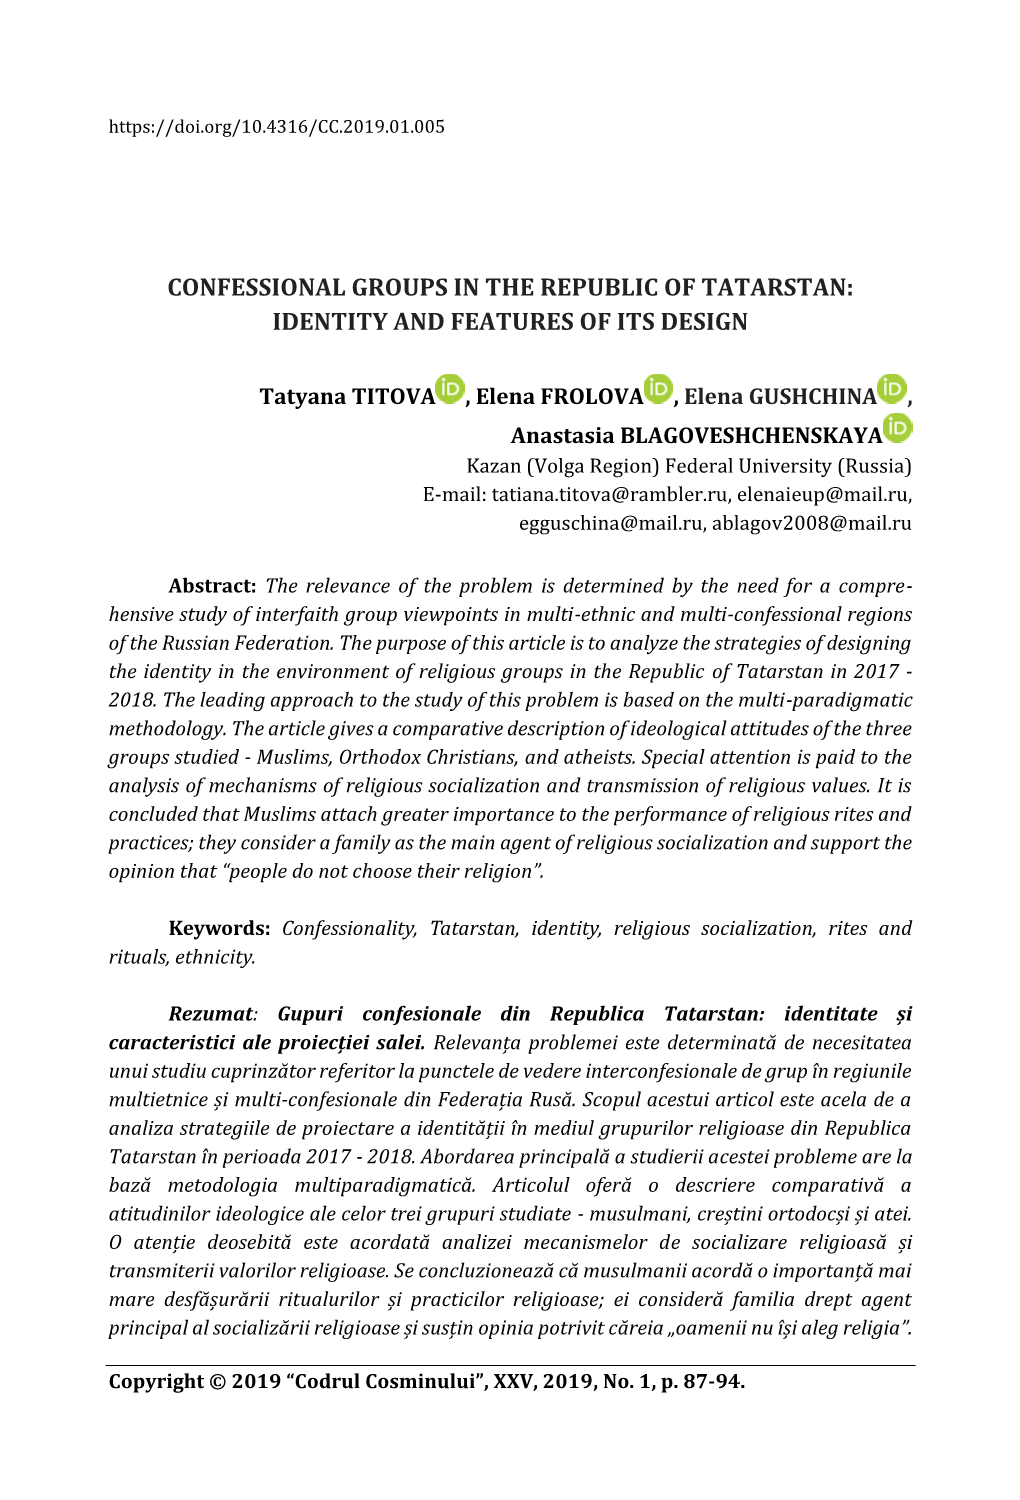 Confessional Groups in the Republic of Tatarstan: Identity and Features of Its Design